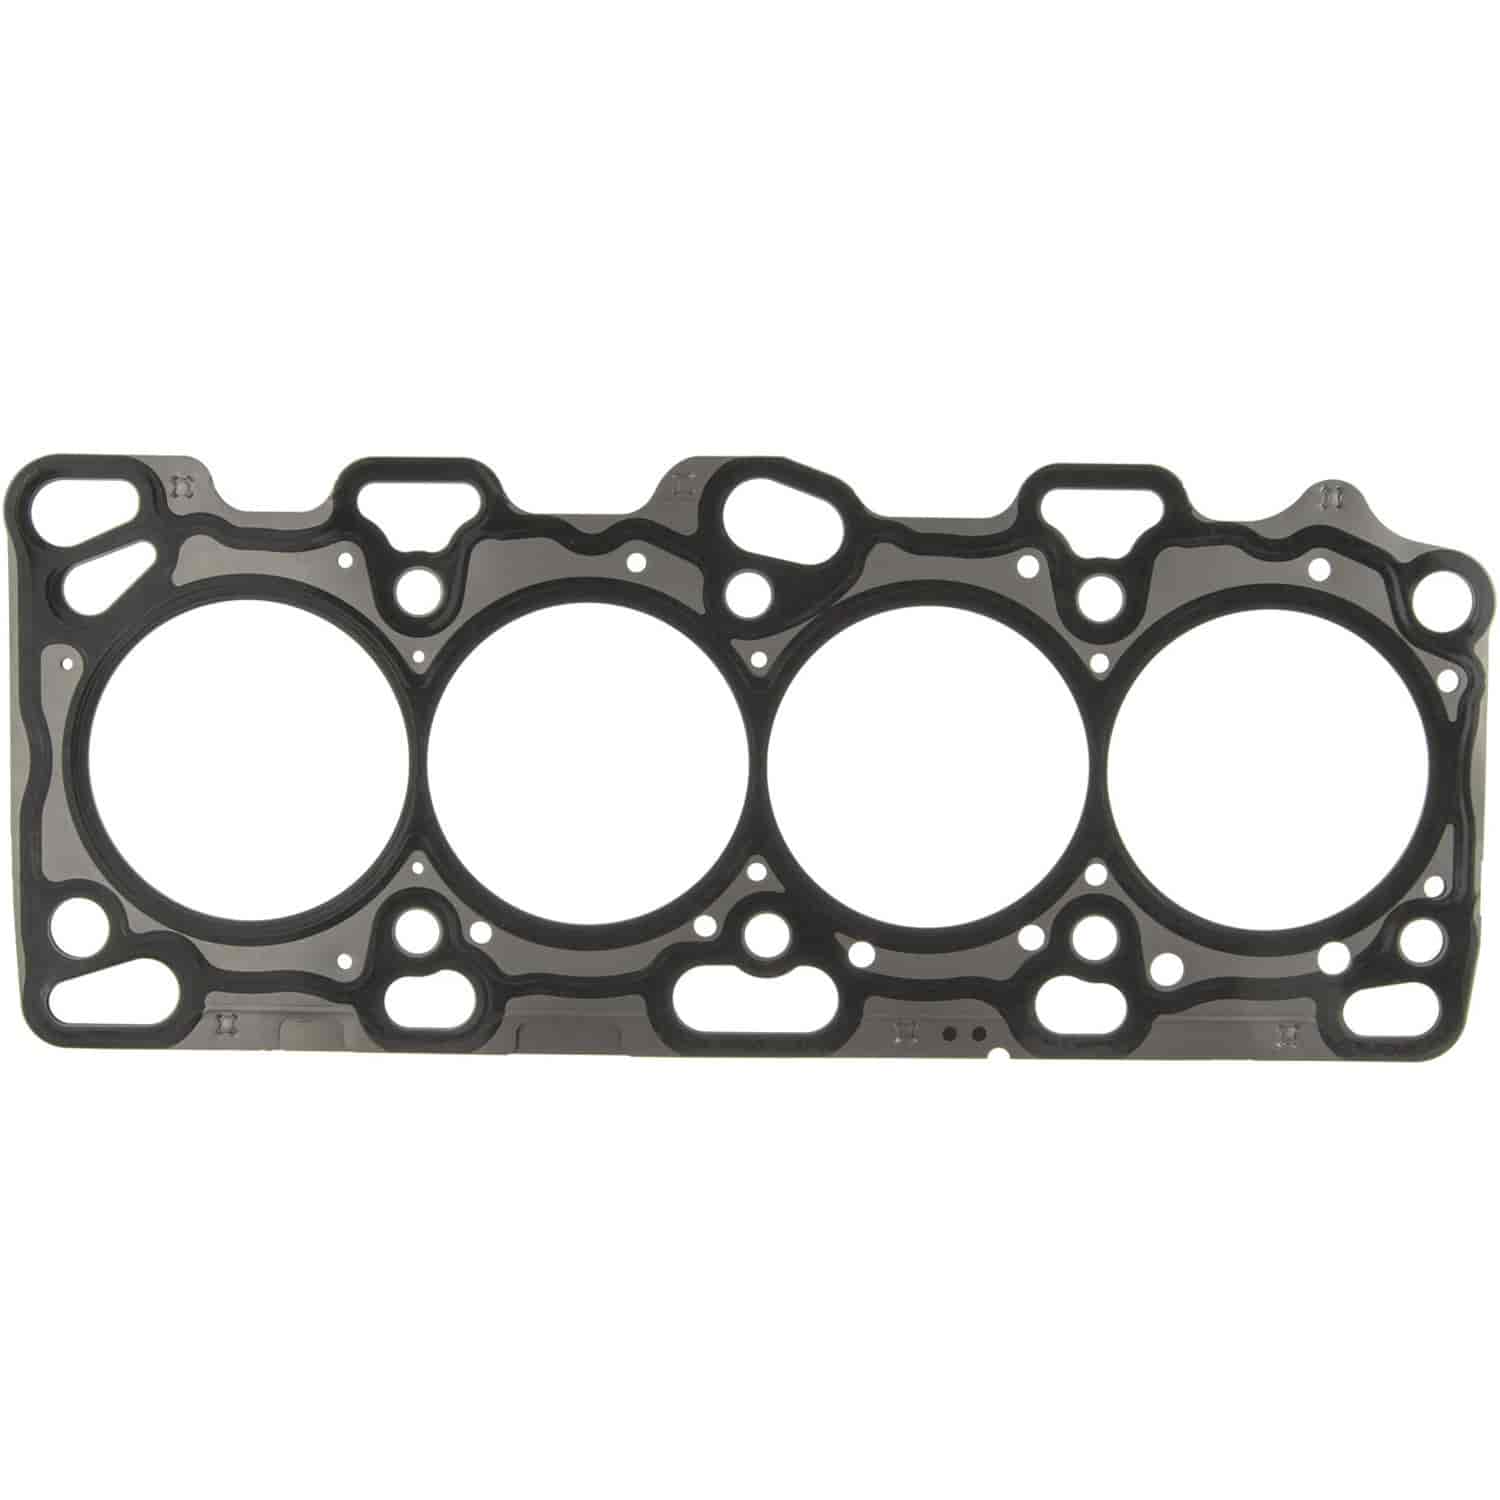 Cylinder Head Gasket Mitsubishi 2.4L 4G64 SOHC 16V 1998-2001 Galant From 2/98 Eclipse From